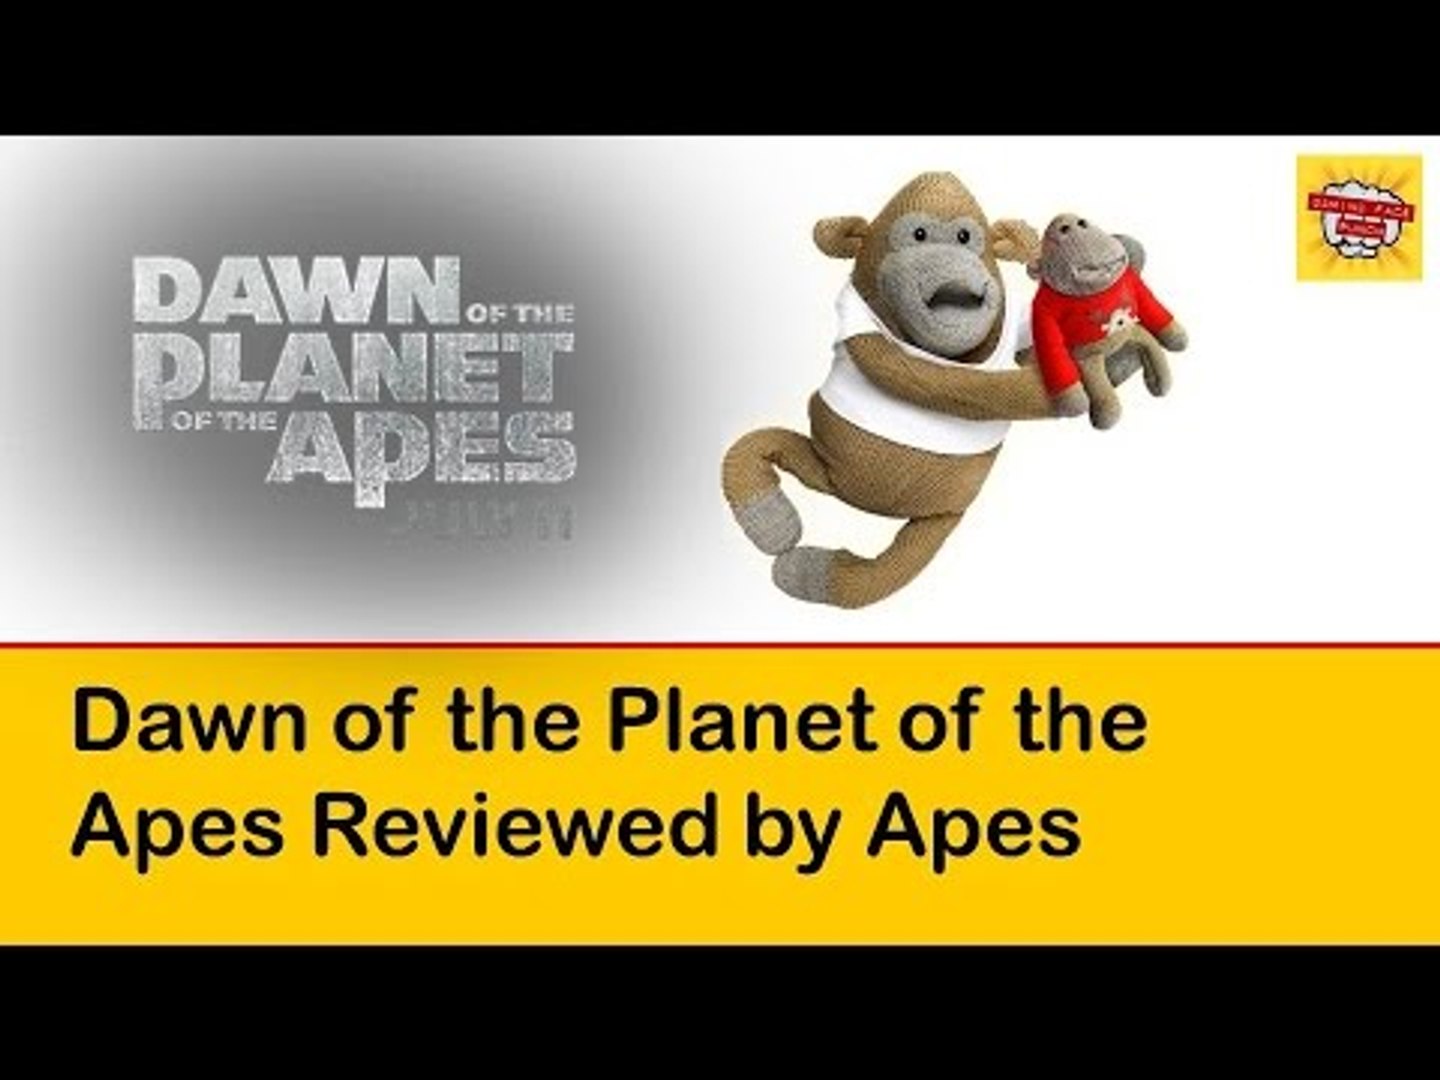 Dawn of the Planet of the Apes - The Apes give their thoughts #LetsGrowTogether